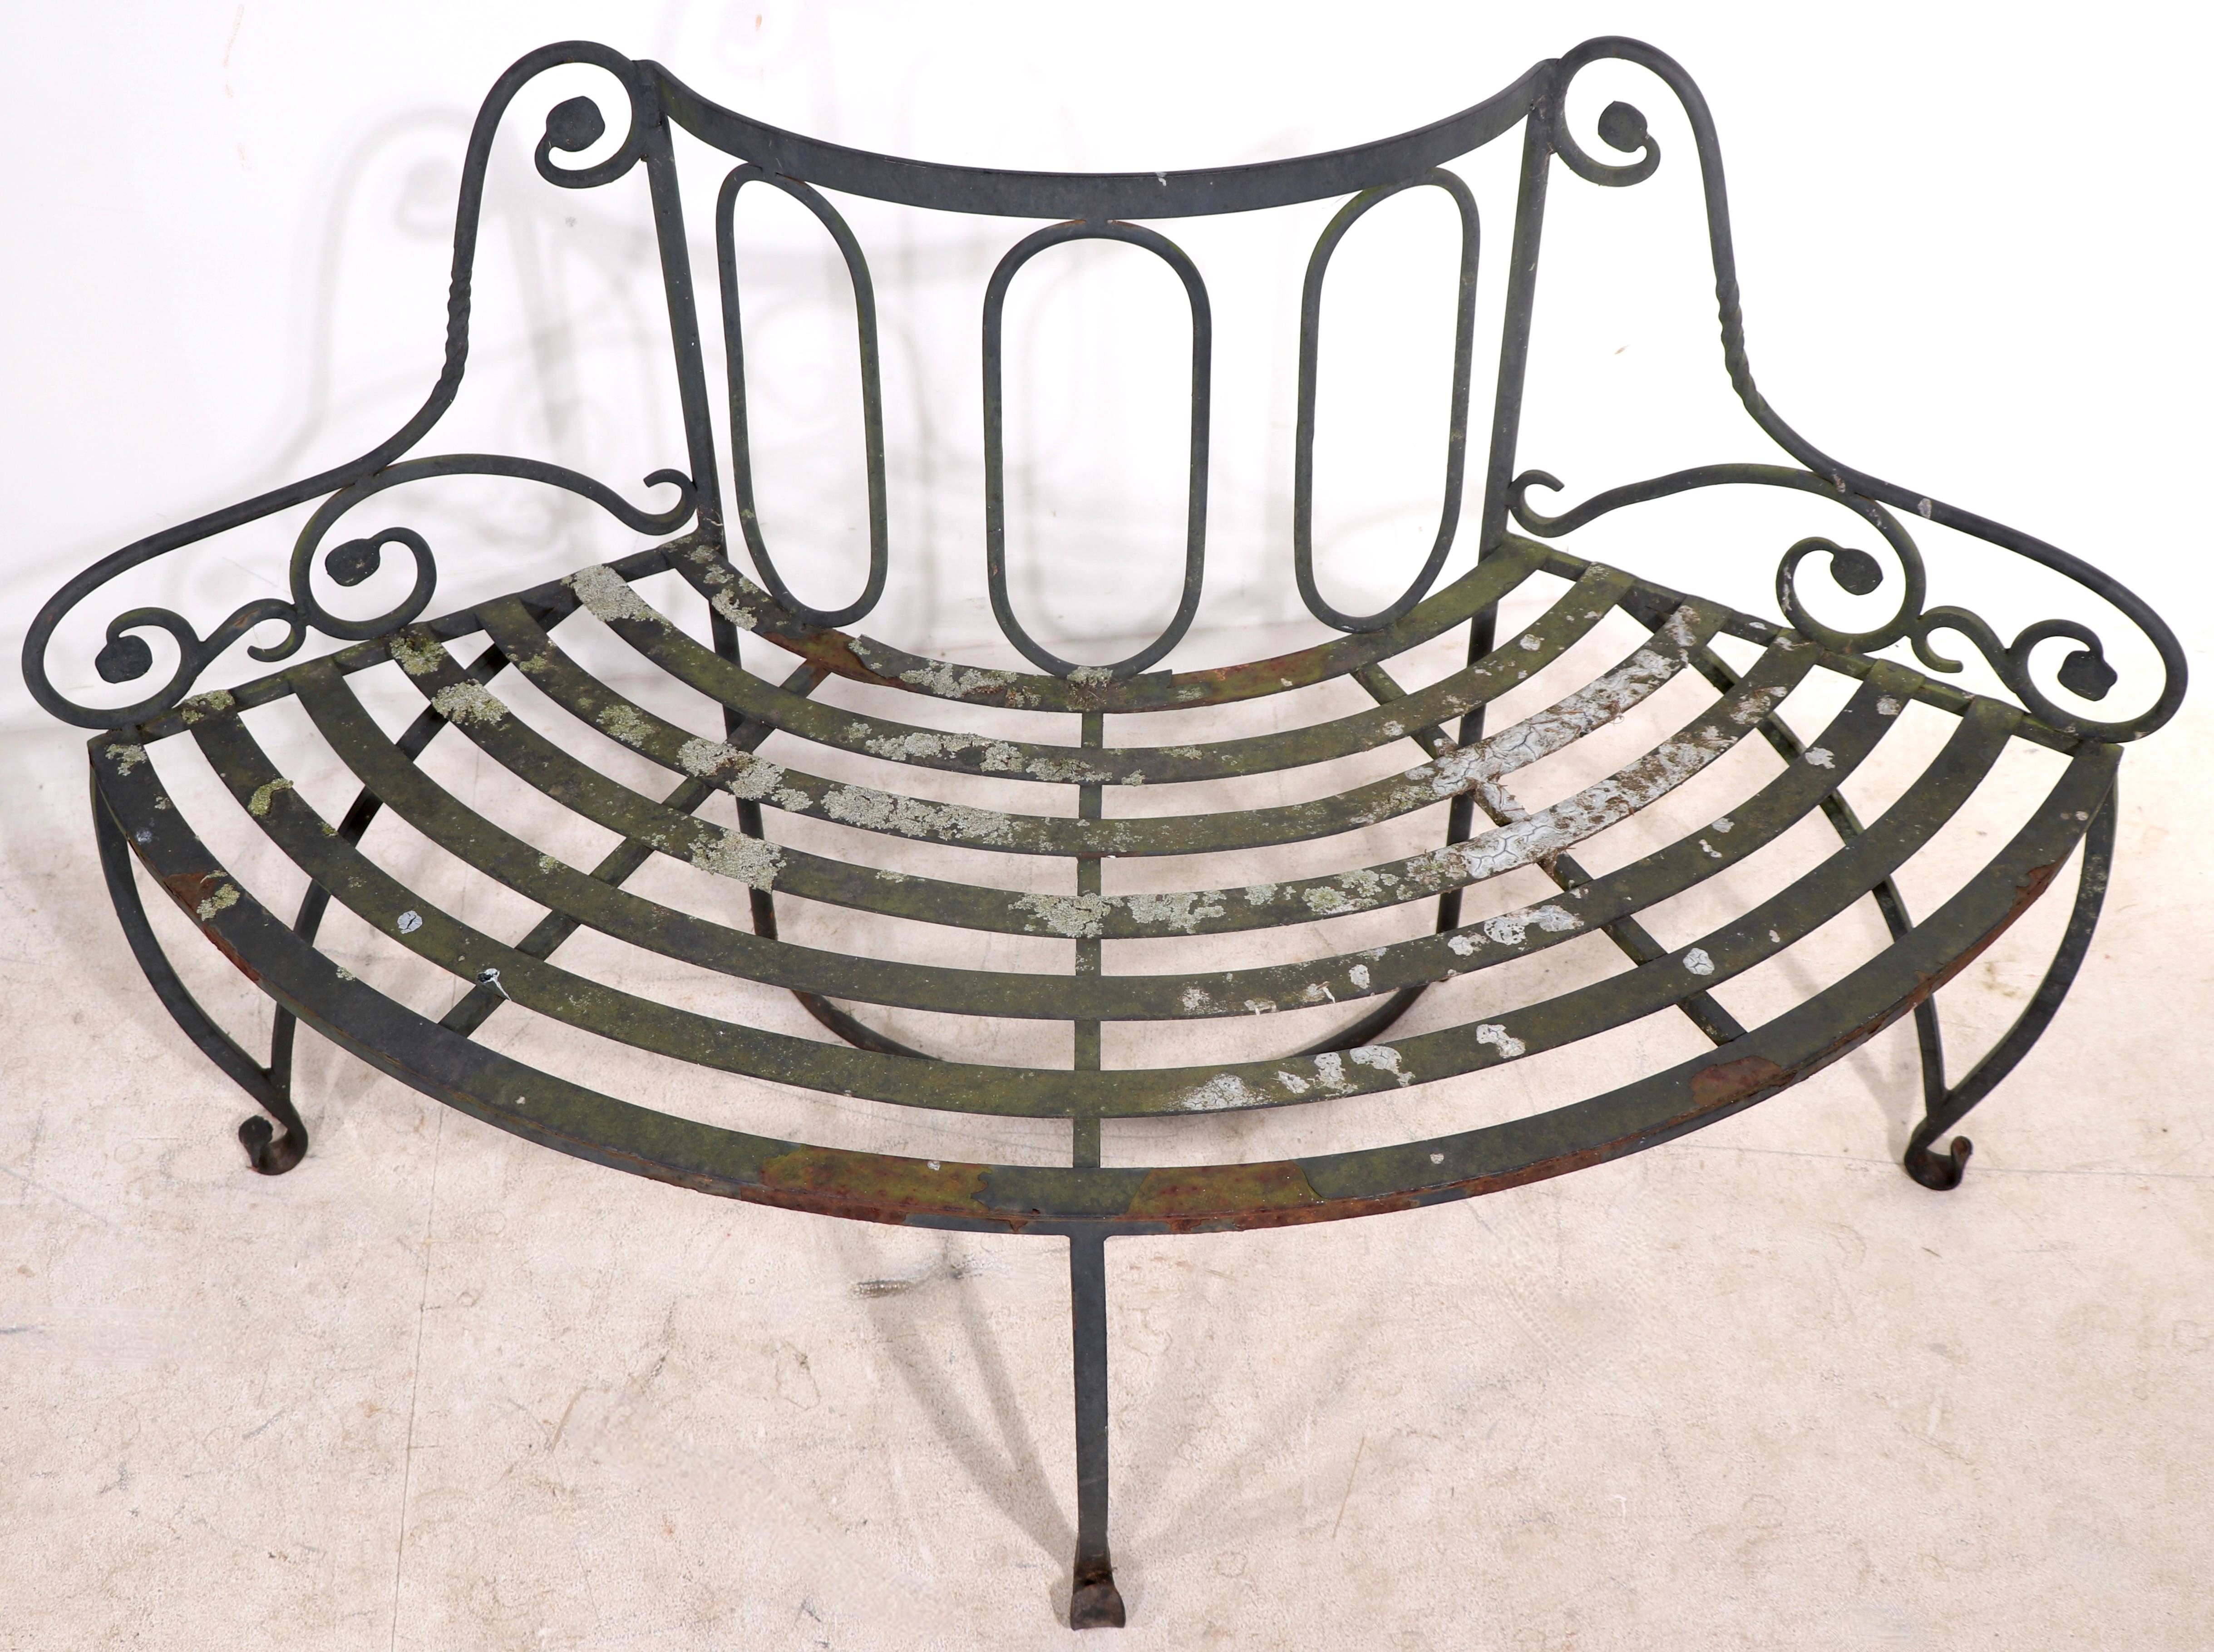 Charming wrought iron three section tree surround bench, in appealing patinated finish. The bench consists of three sections each approximately 48 W x 16 D x 29 H. When assembled the bench is 56 Total Dia x 24 Dia. at center. Seat H 16 x Arm H 21 (